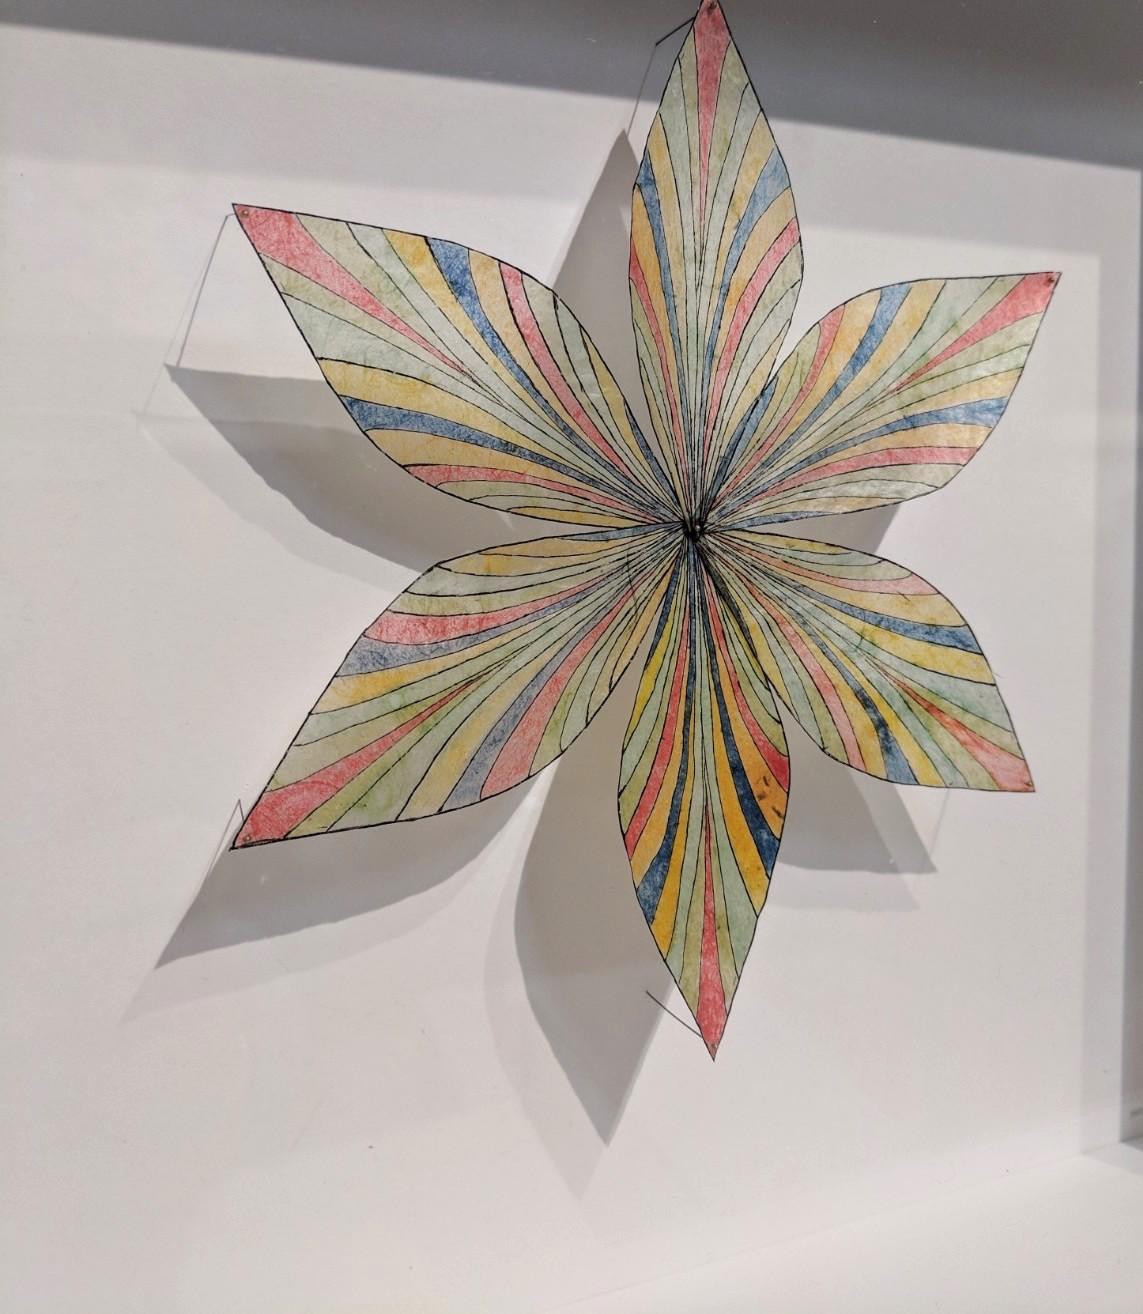 Shooting Star, Pinned Paper Flower in Light Green, Blue-Grey, Light Orange, Red - Contemporary Sculpture by Jill Parisi